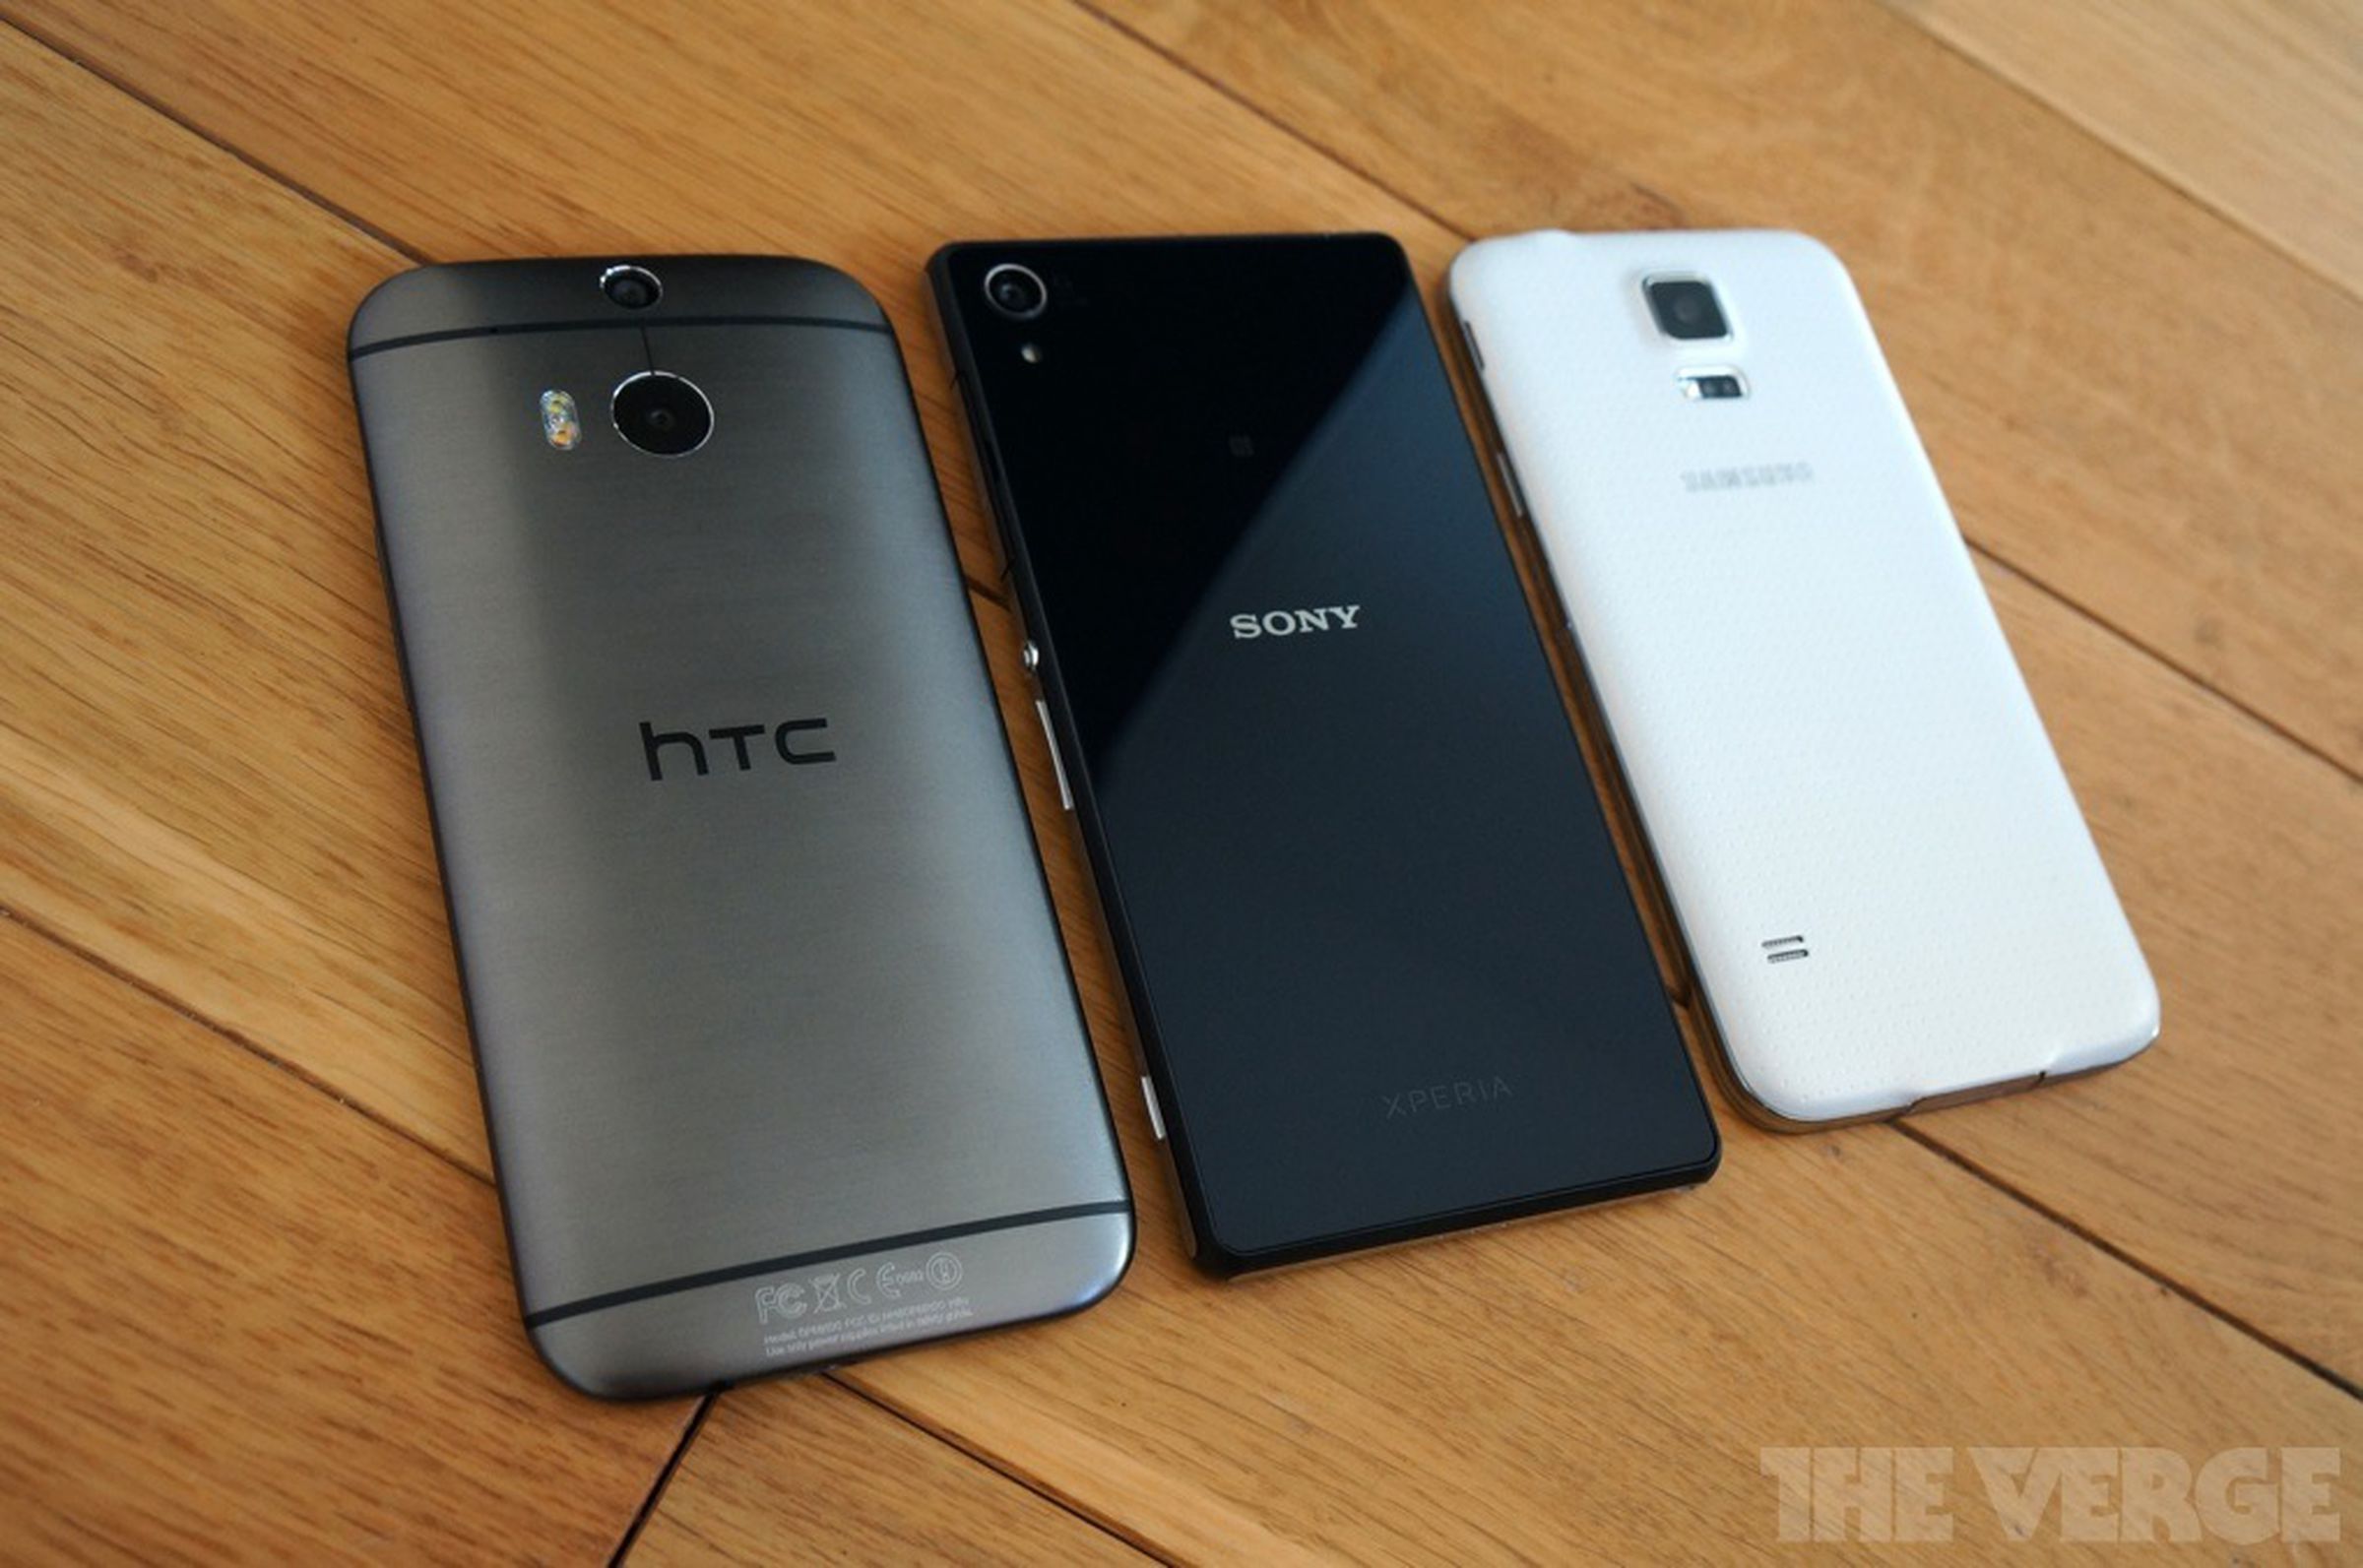 HTC One, Sony Xperia Z2, and Samsung Galaxy S5: 2014's flagship Android phones